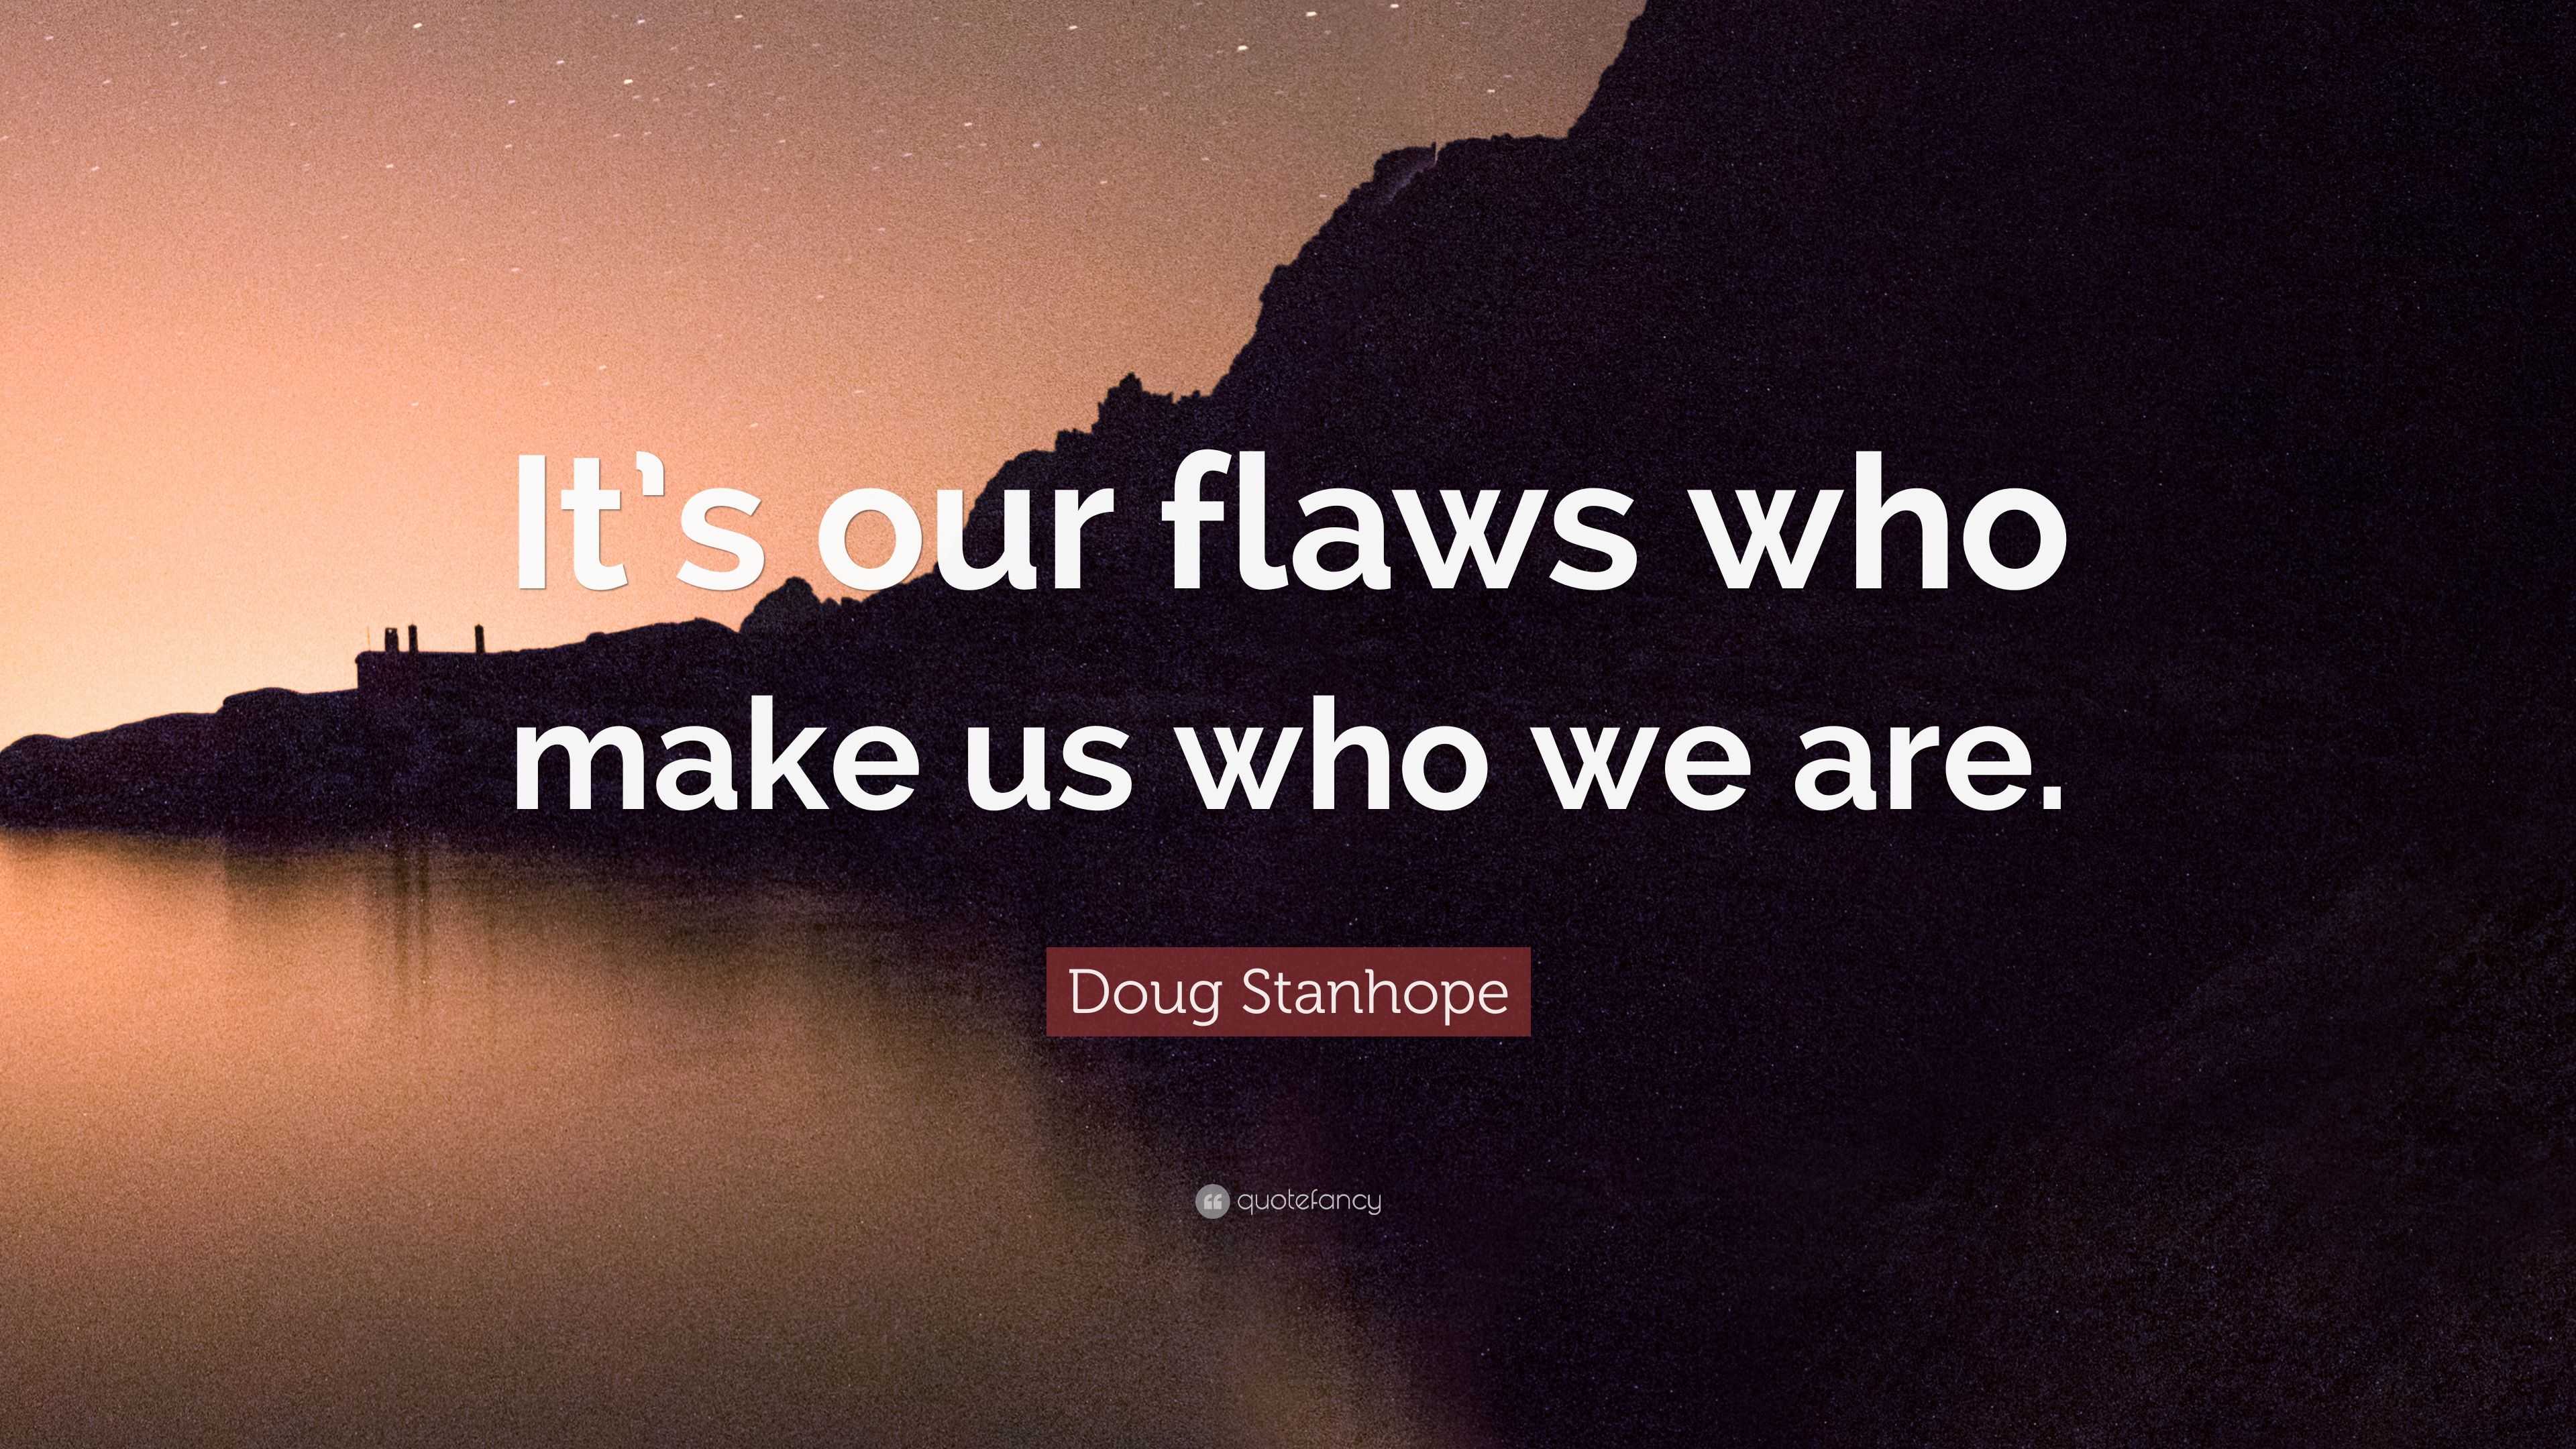 Doug Stanhope Quote It S Our Flaws Who Make Us Who We Are 7 Wallpapers Quotefancy